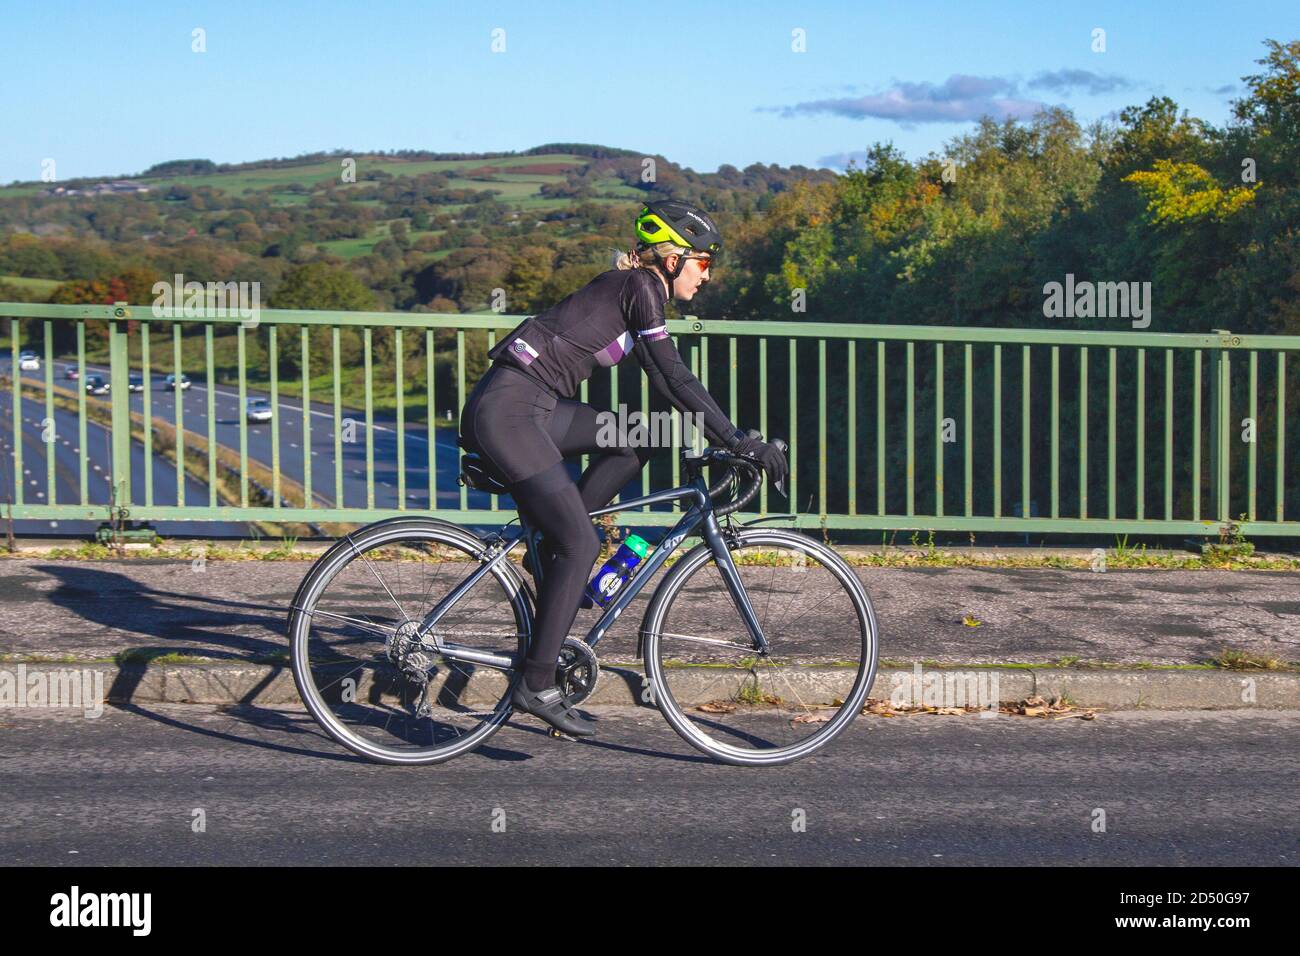 Female cyclist in Lycra riding LIV sports road bike on countryside route crossing motorway bridge in rural Lancashire, UK Stock Photo